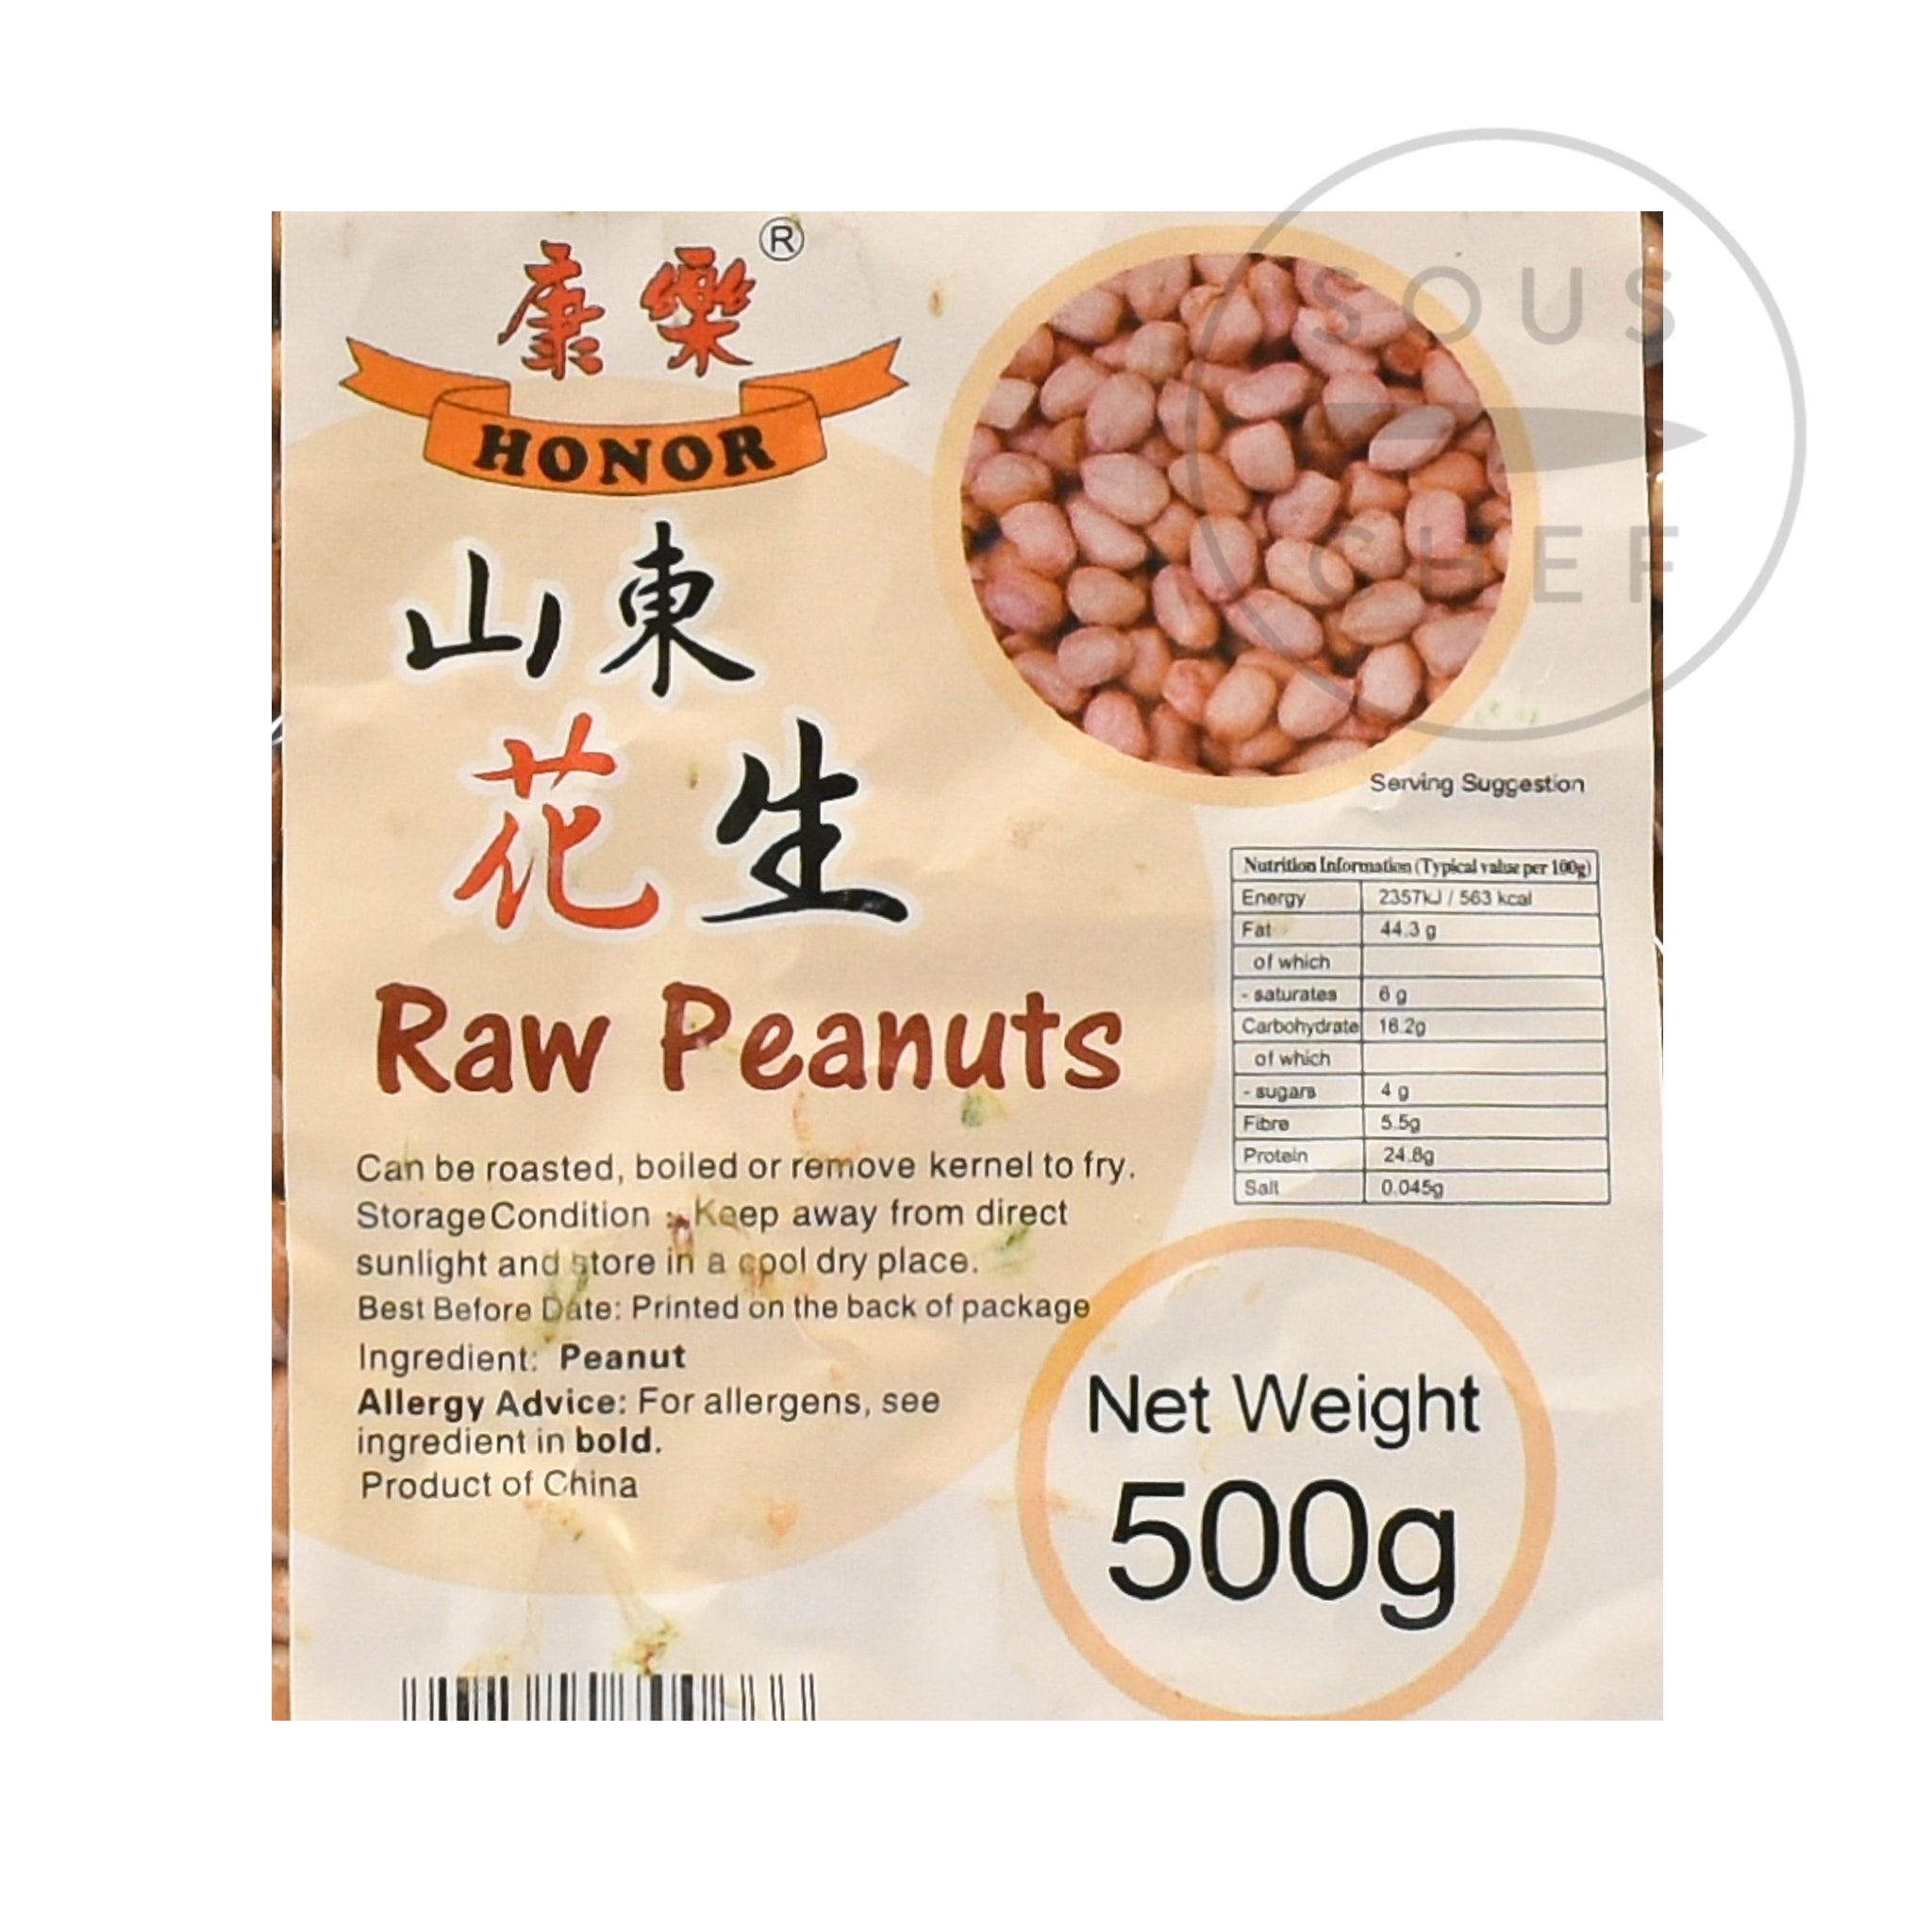 Unsalted Raw Peanuts 500g nutritional information ingredients